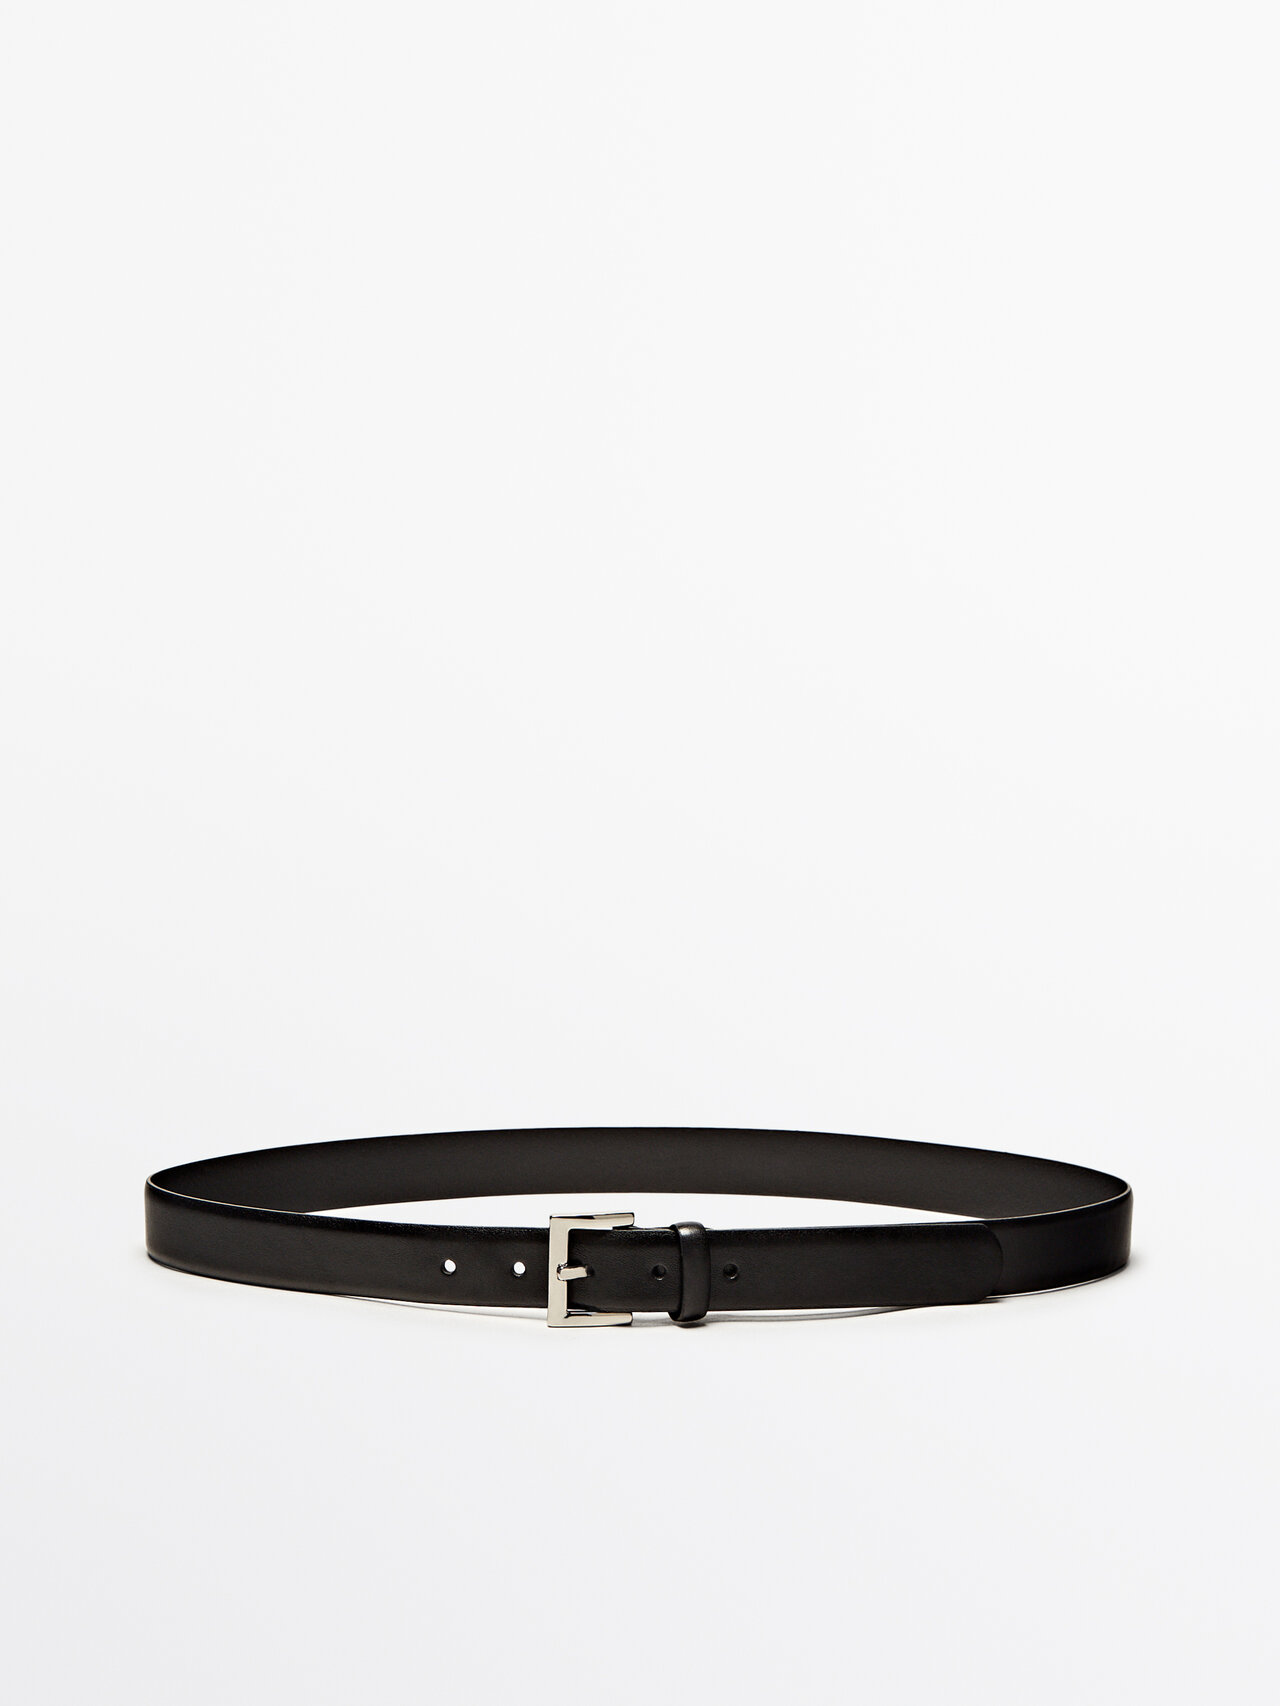 Massimo Dutti Leather Belt With Square Buckle In Black